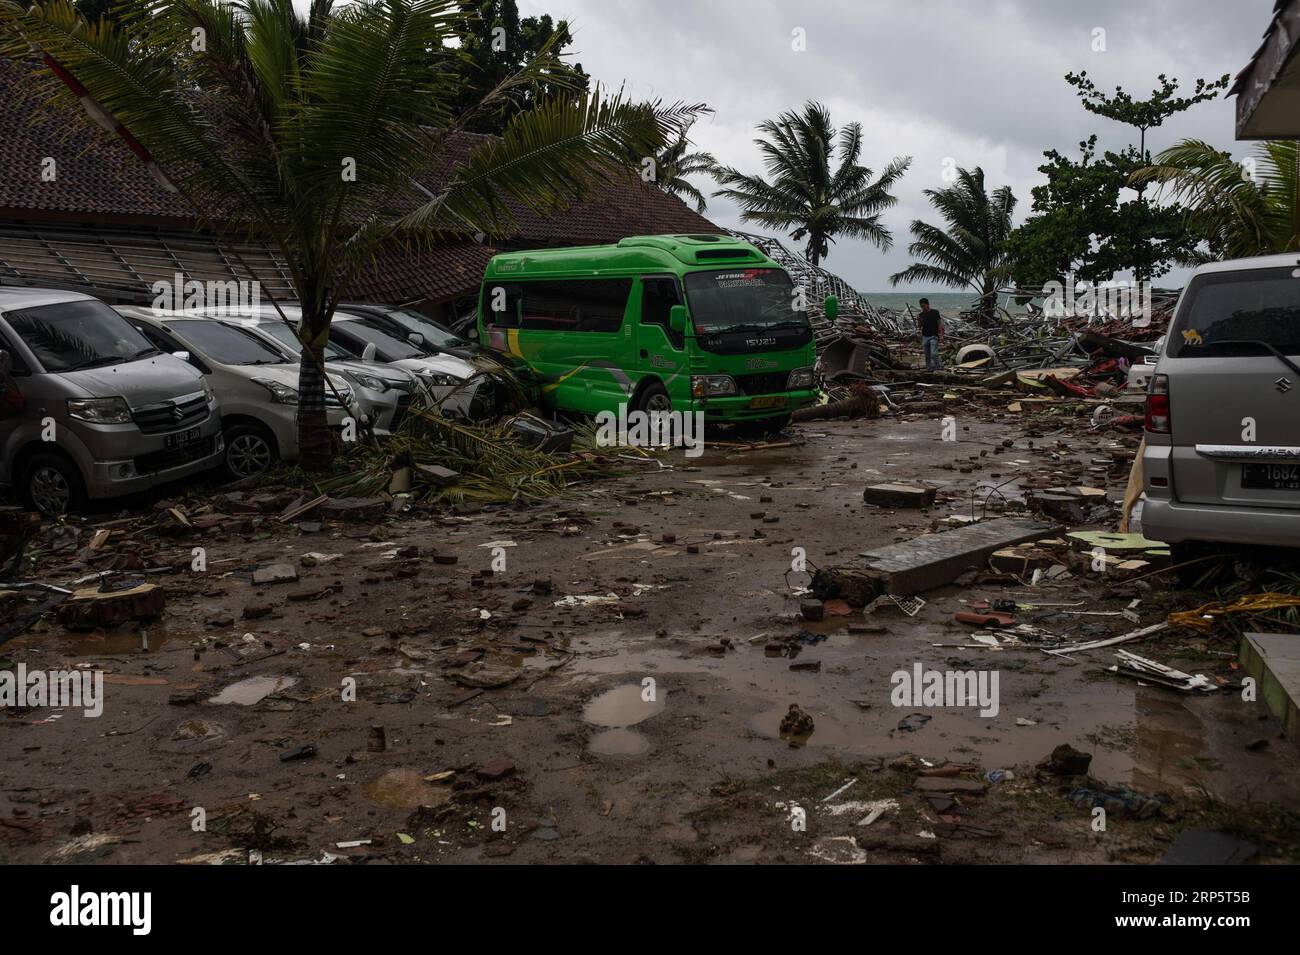 (181223) -- PANDEGLANG, Dec. 23, 2018 -- Vehicles are seen among the debris after a tsunami hit Sunda Strait in Pandeglang, Banten province, in Indonesia, Dec. 23, 2018. The total casualty of a tsunami triggered by the eruption of Krakatau Child volcano has increased to 168 people in coastal areas of Sunda Strait of western Indonesia, disaster agency official said here on Sunday. The catastrophe killed at least 168 people, wounded at least 745 ones and collapsed a total of 430 houses and nine hotels, and caused damages to scores of ships. ) INDONESIA-PANDEGLANG-TSUNAMI-AFTERMATH VerixSanovri P Stock Photo